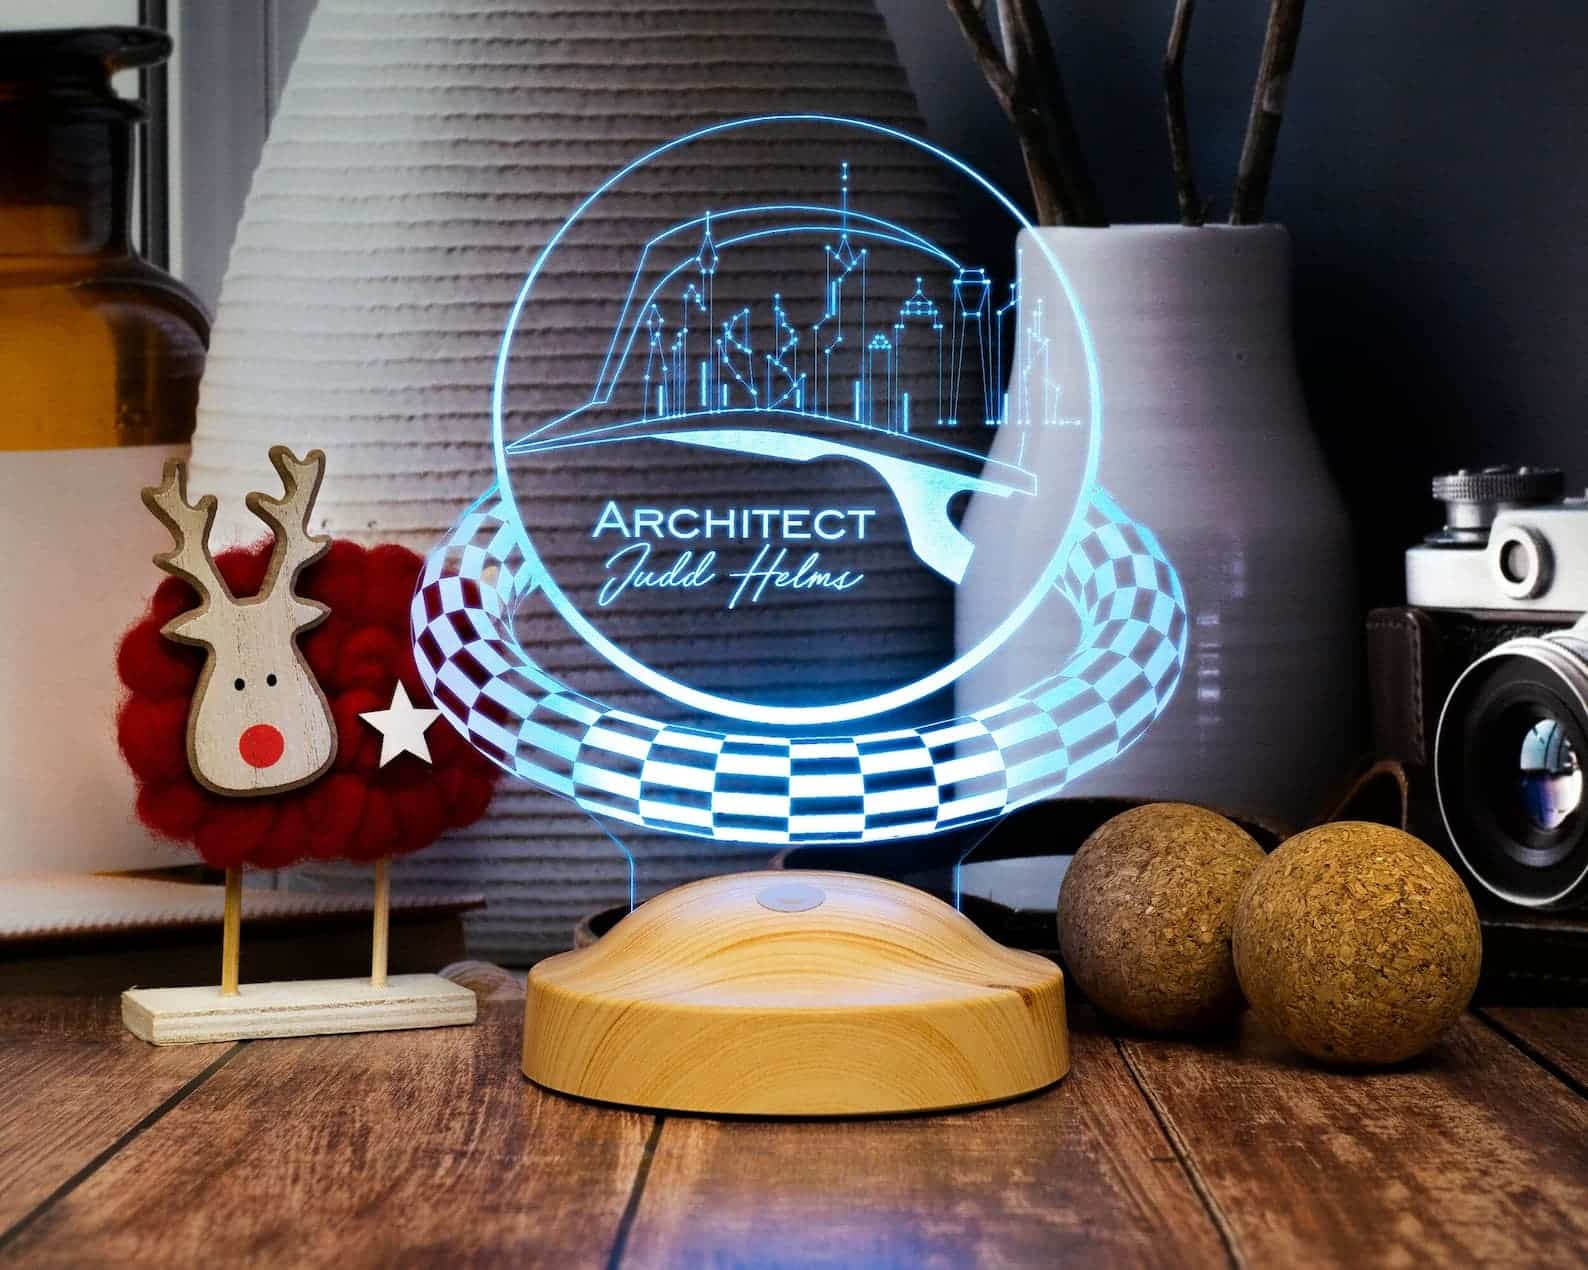 Personalized 3D Architect Lamp